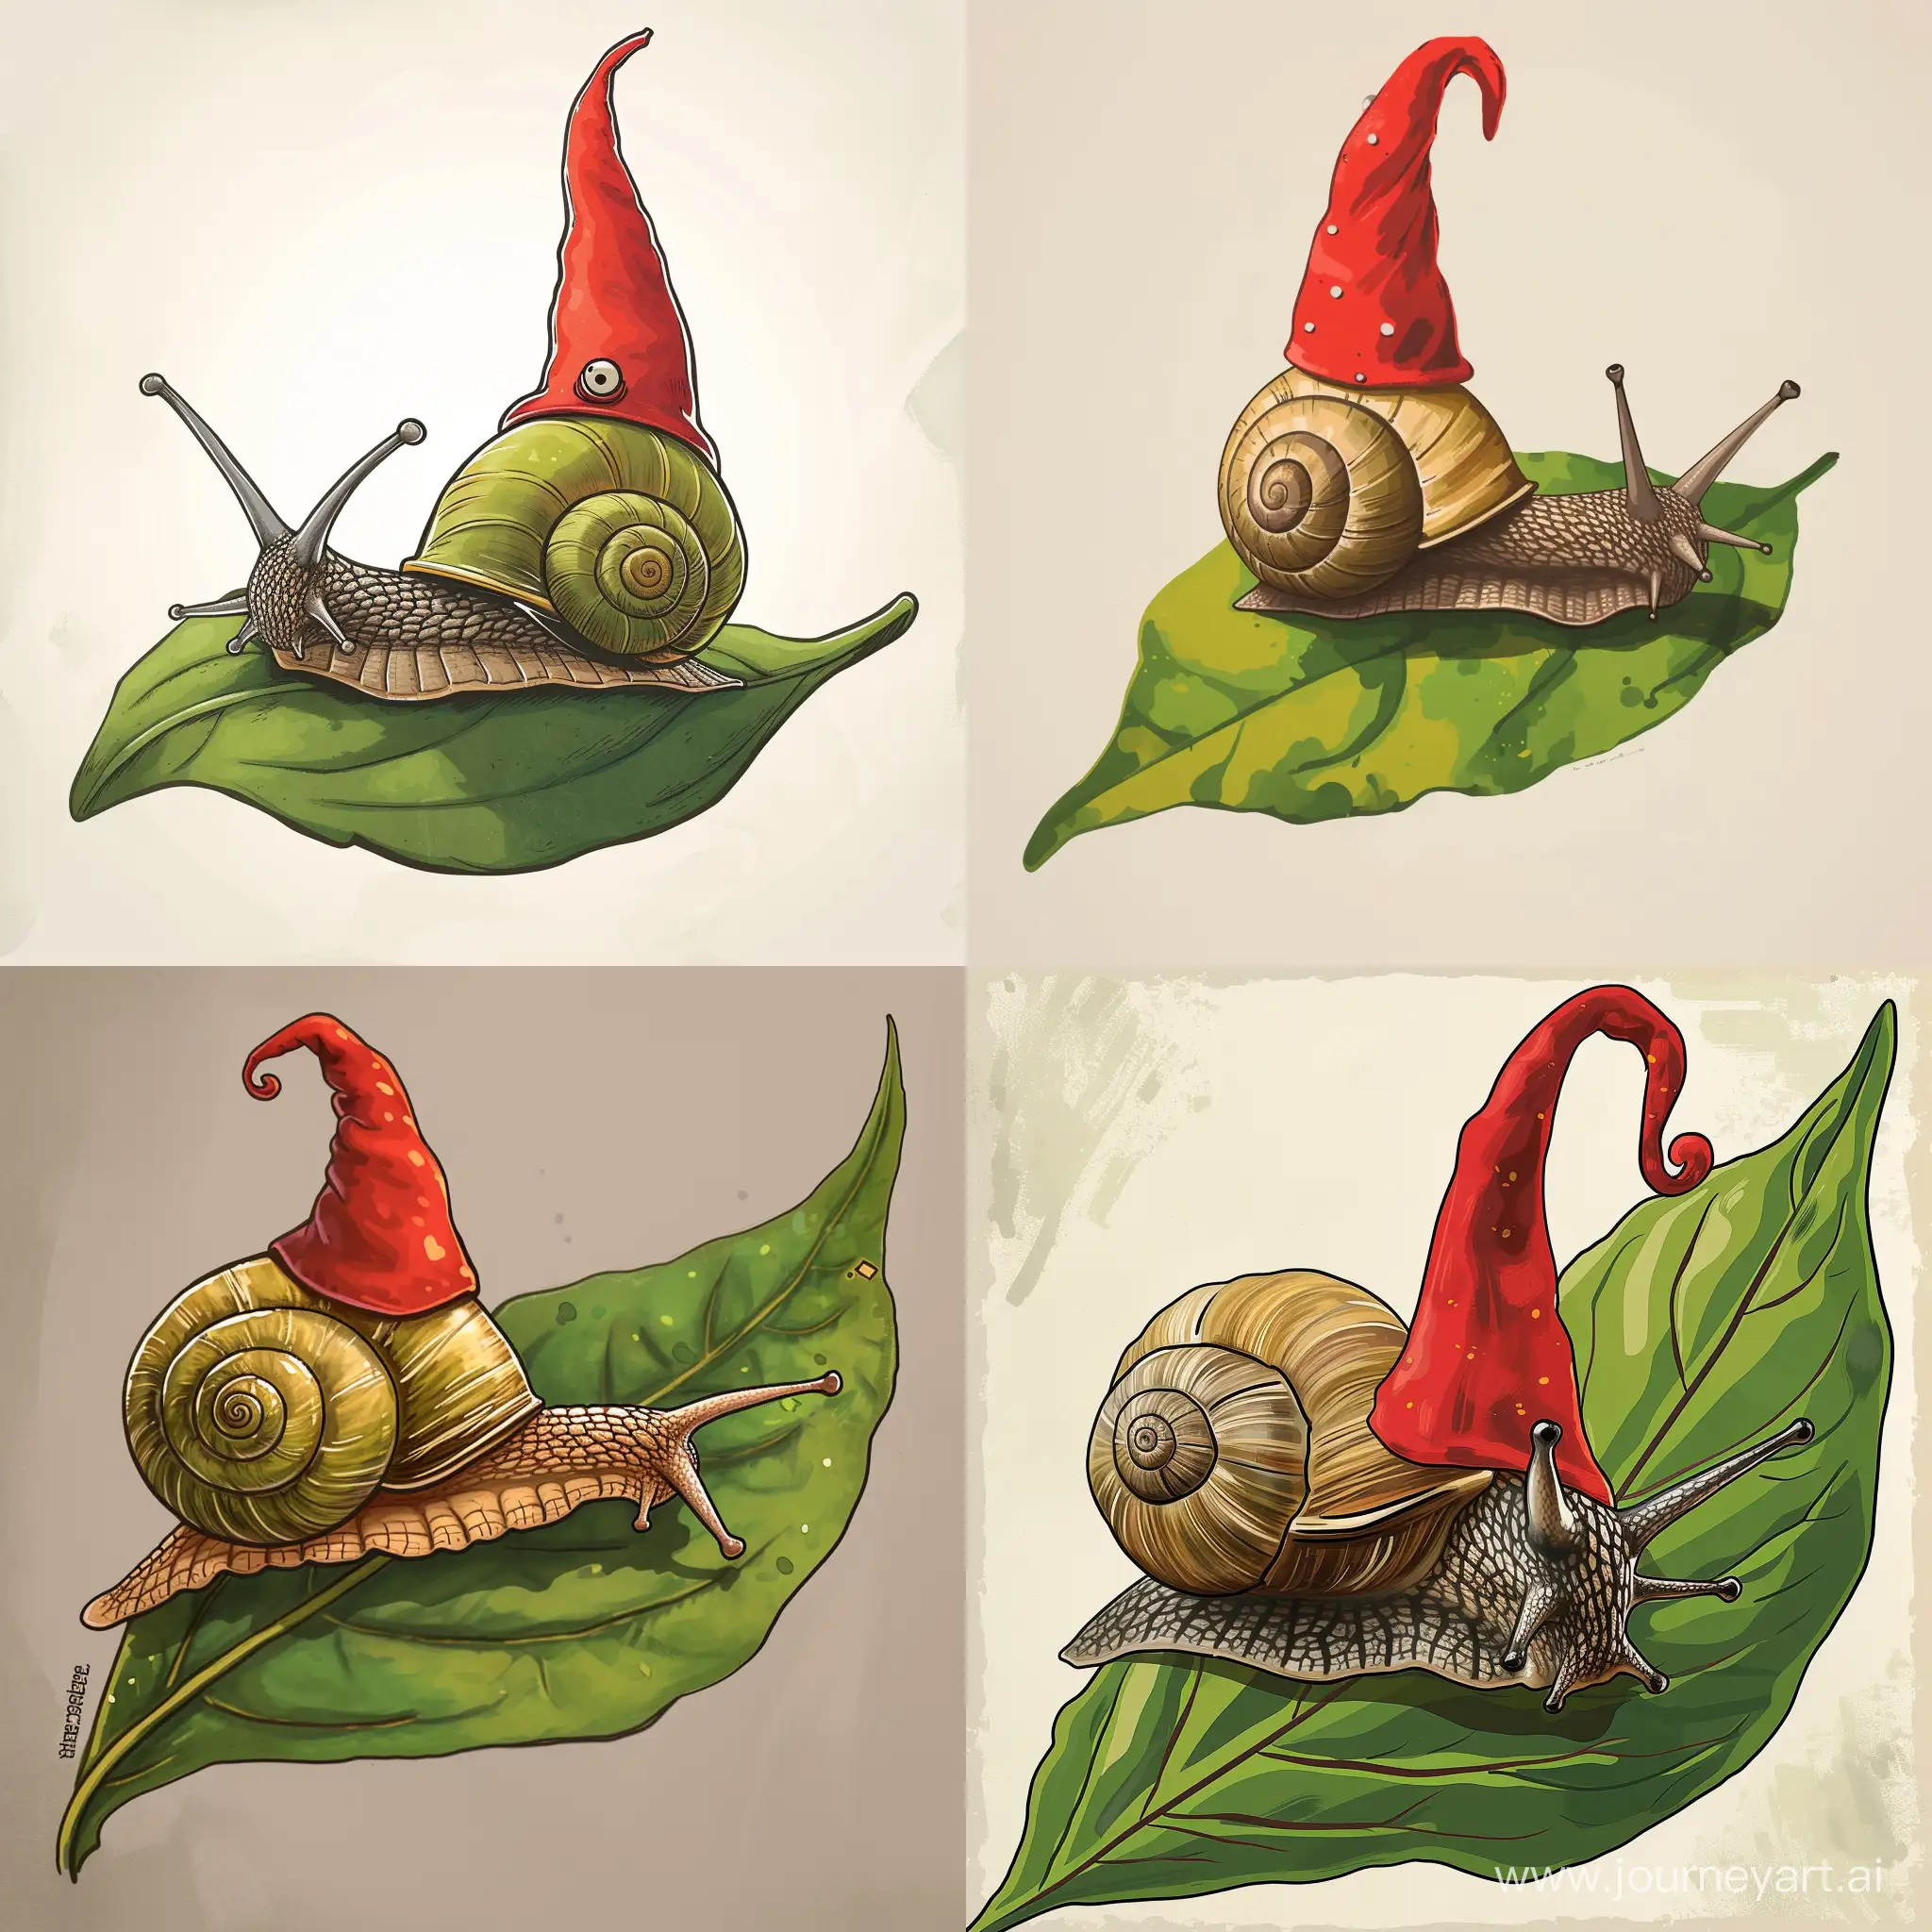 Cheerful-Cartoon-Snail-with-Red-Gnome-Hat-on-Pepper-Leaf